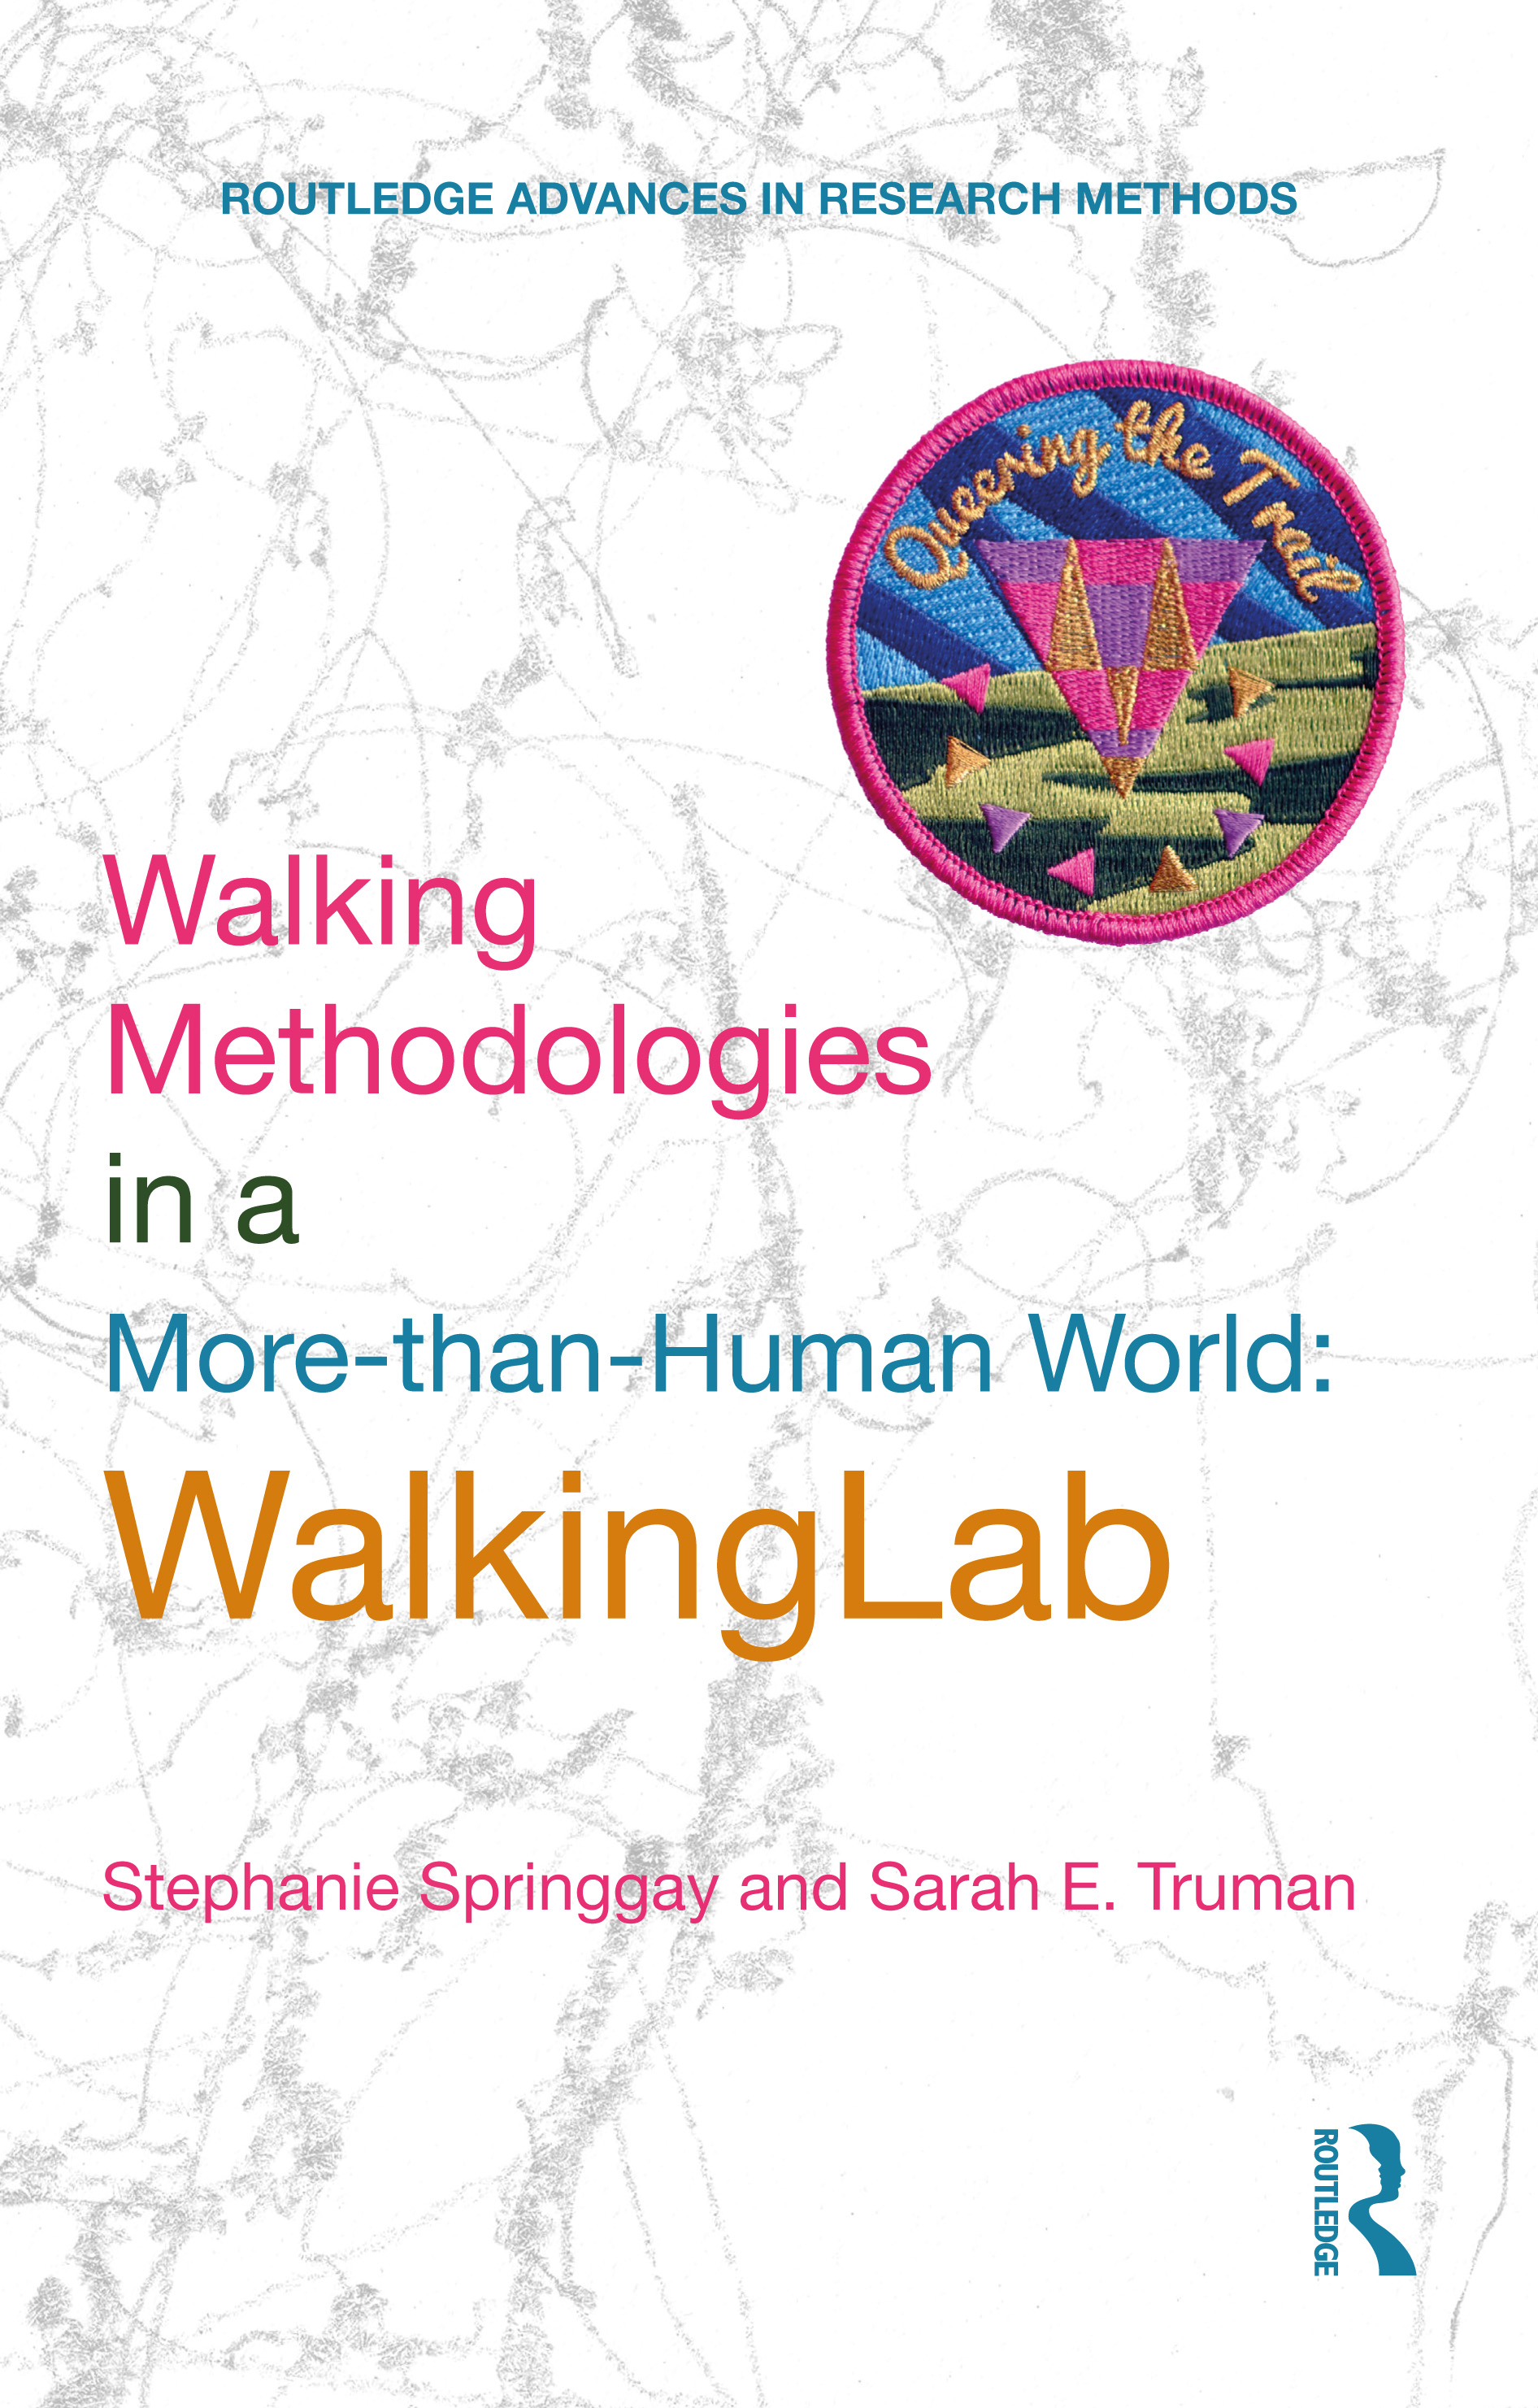 WalkingLab’s book is released by Routledge!